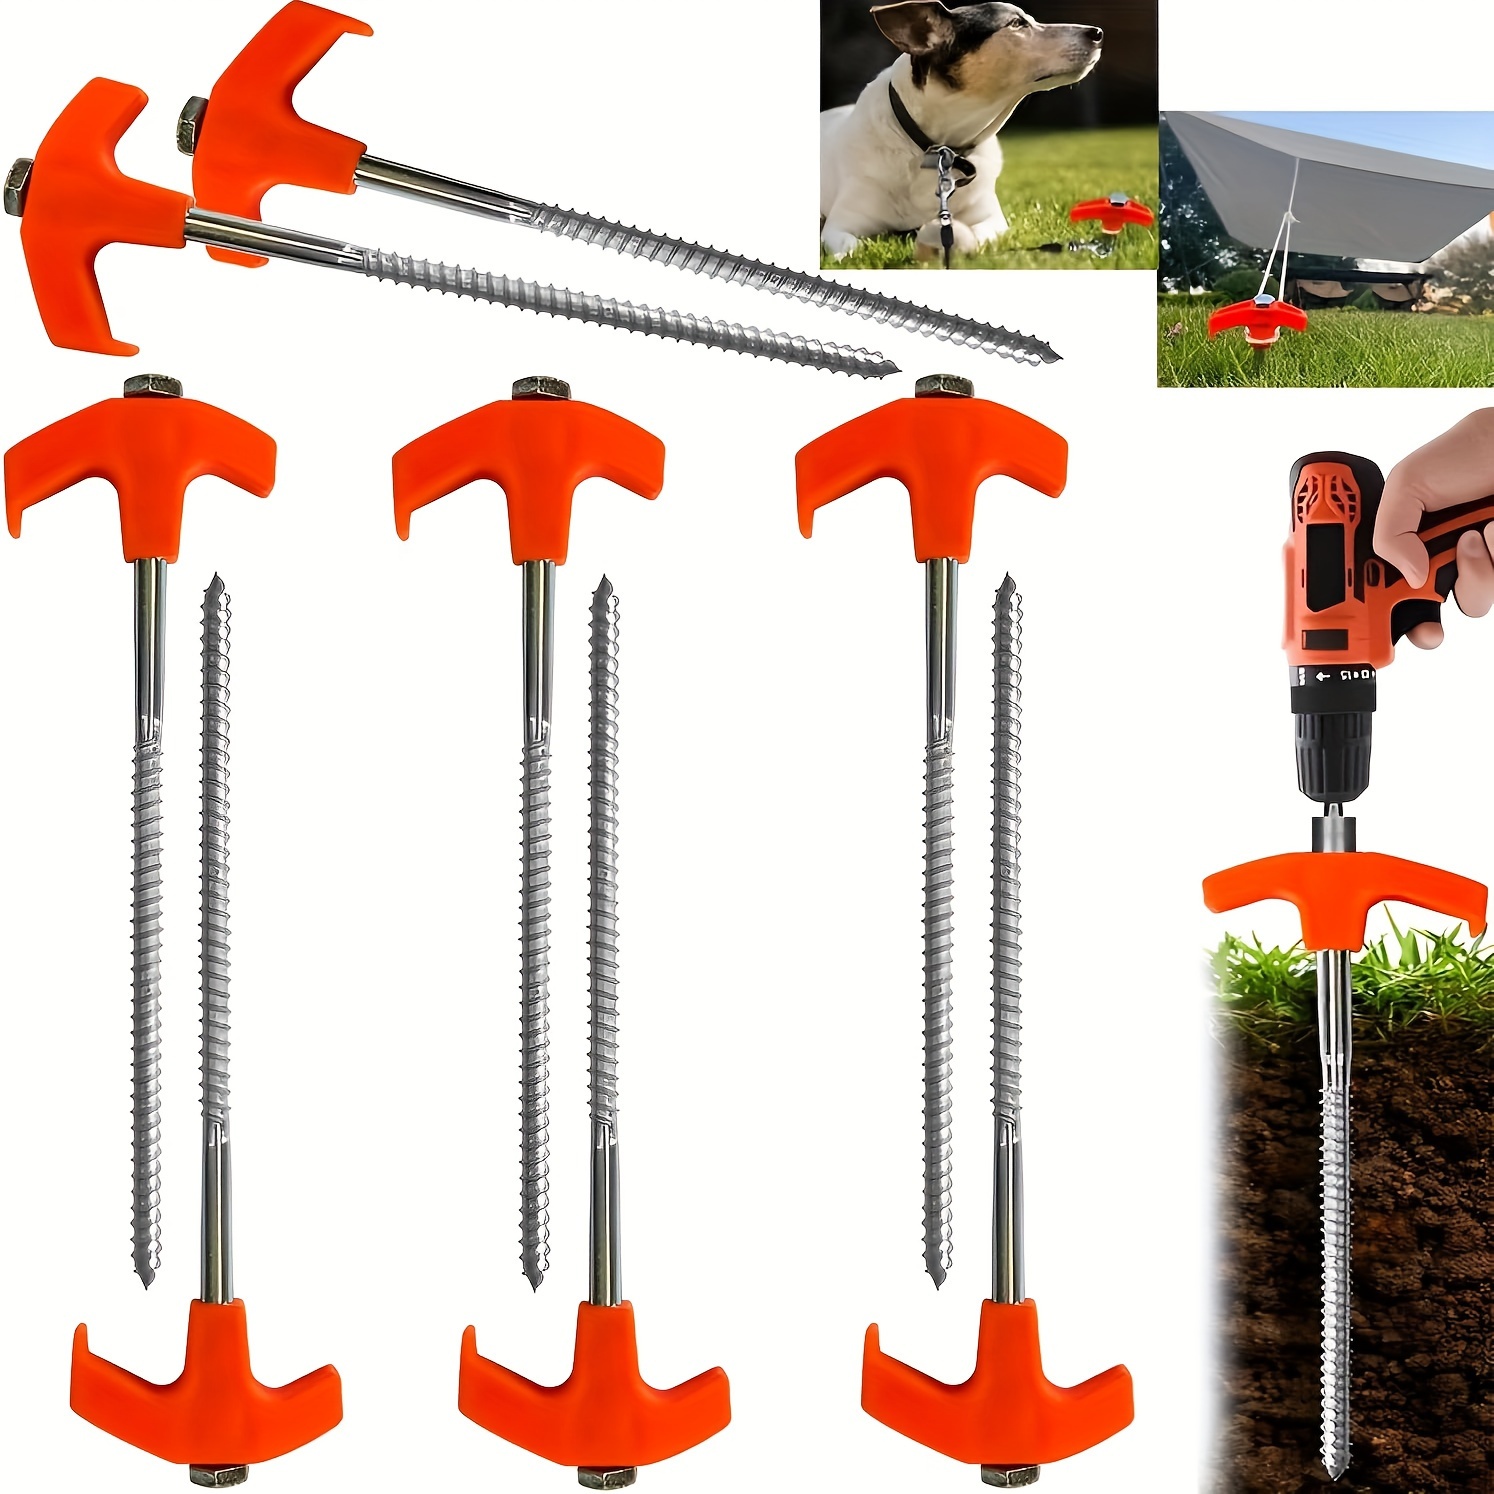 

8pcs 8-inch Tungsten Steel Tent Stakes - Heavy-duty Hex Pegs Drillable Ground Anchors With Hexagonal Head Design, Durable Studs For Camping, Canopies, Gardens & Grasslands, Glow-in-the-dark Features